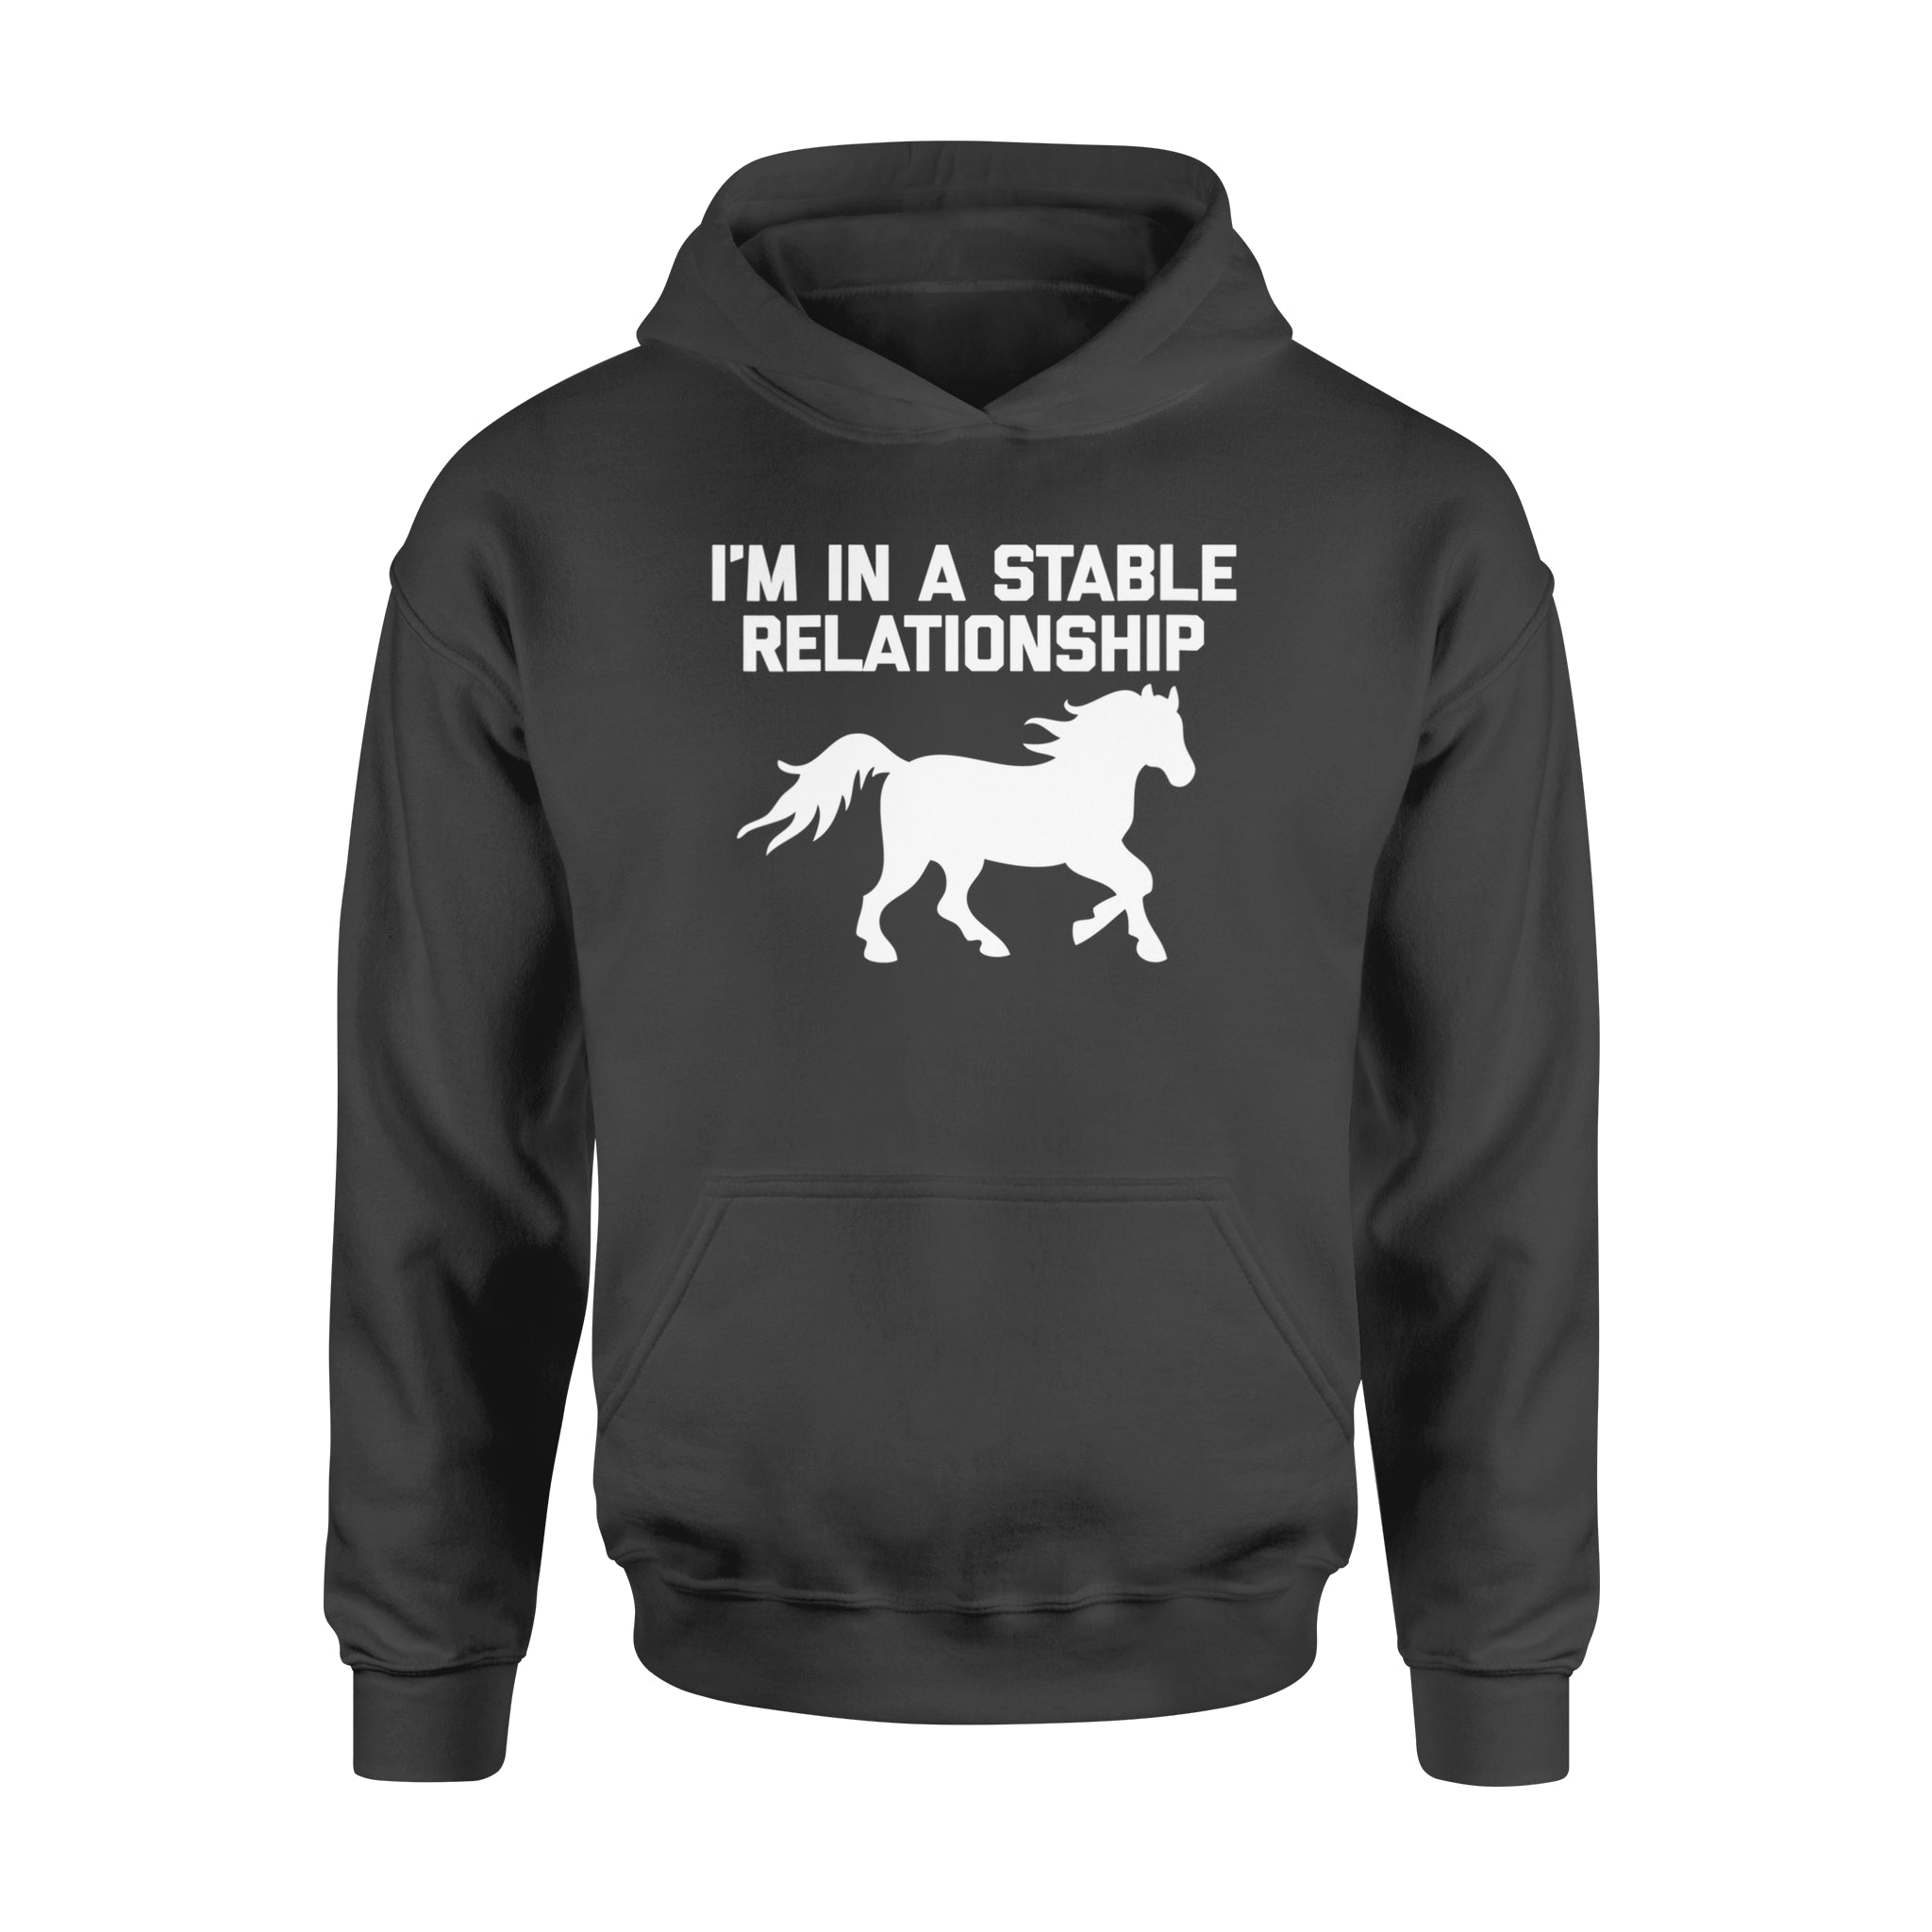 Funny "I'm In A Stable Relationship" Hoodie for Women - FSD1112